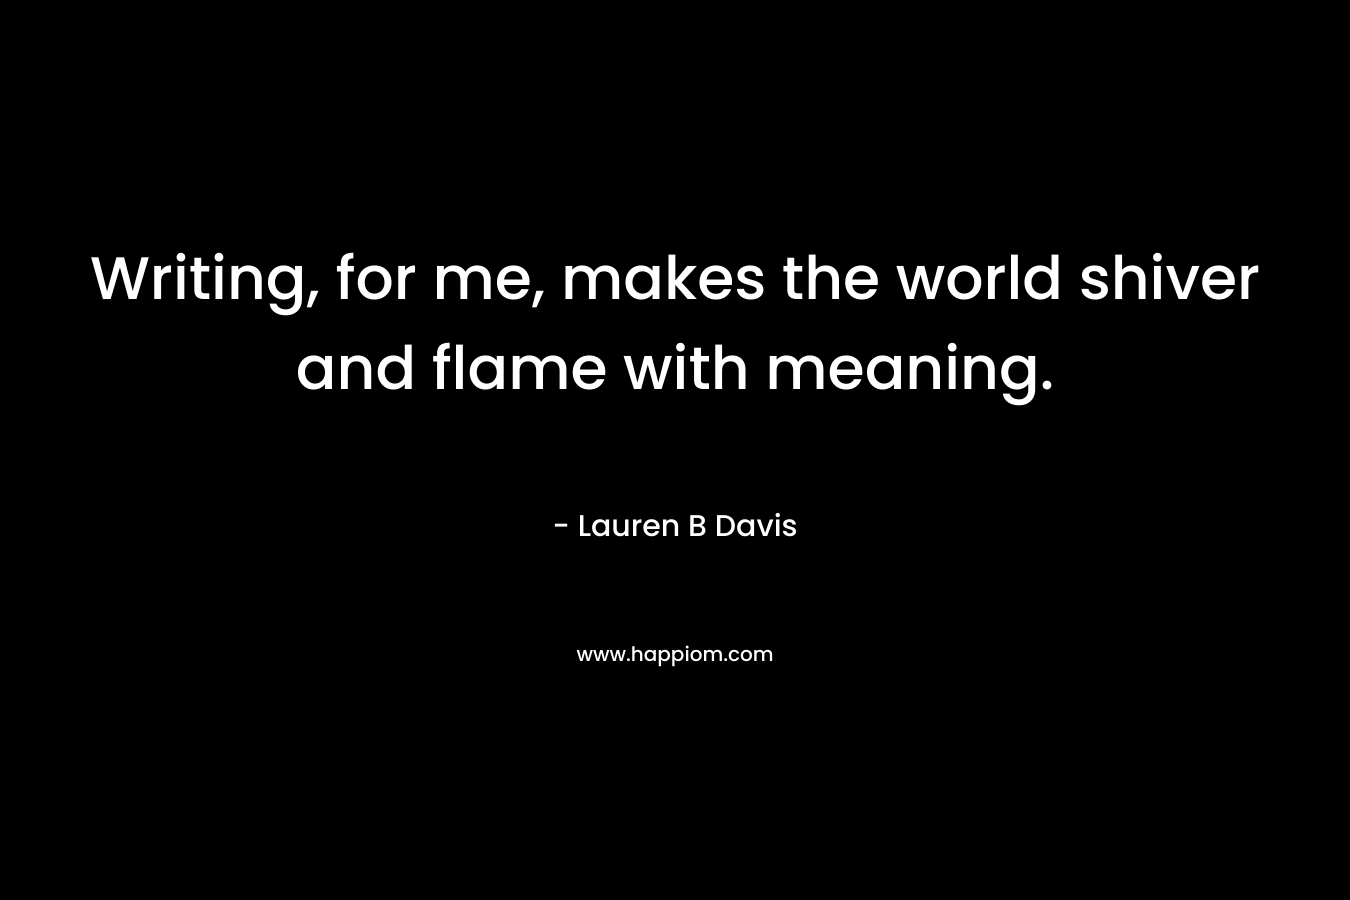 Writing, for me, makes the world shiver and flame with meaning. – Lauren B Davis